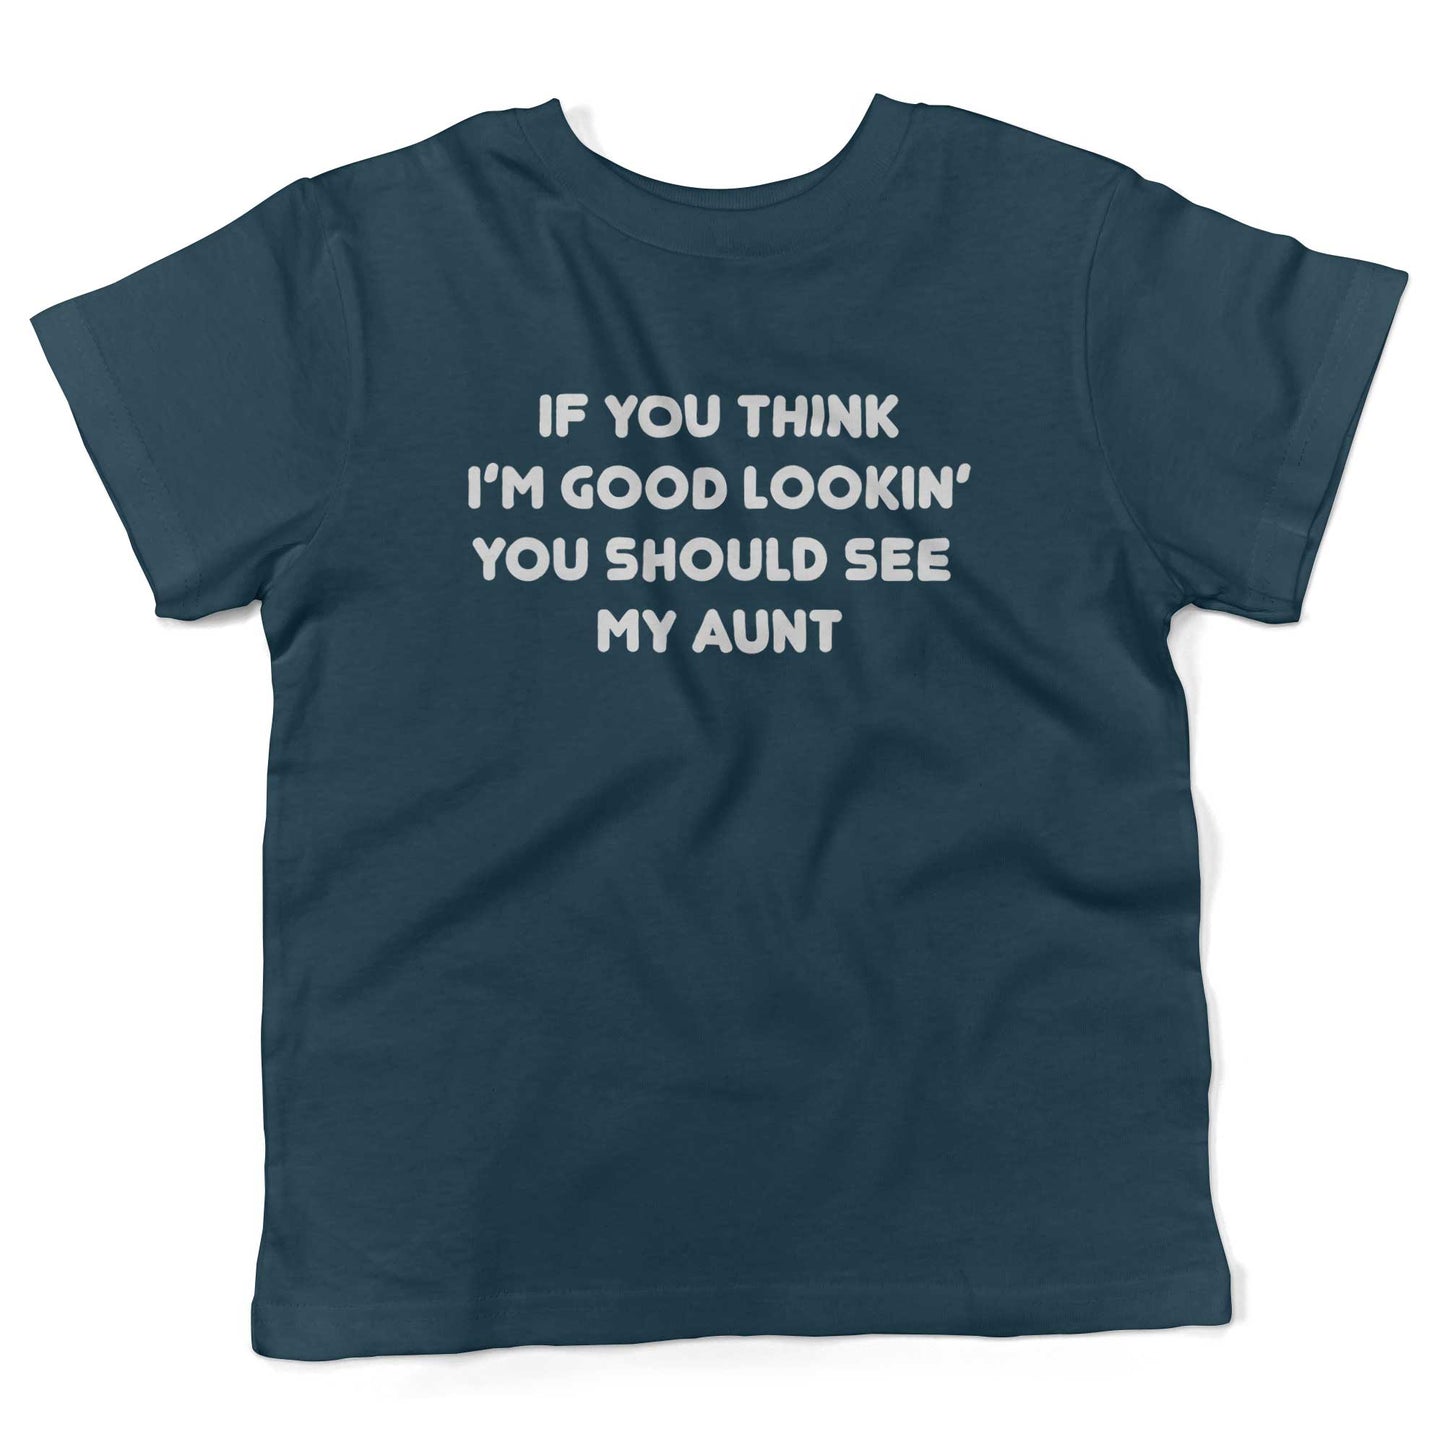 If You Think I'm Good Lookin' You Should See My Aunt Toddler Shirt-Organic Pacific Blue-2T